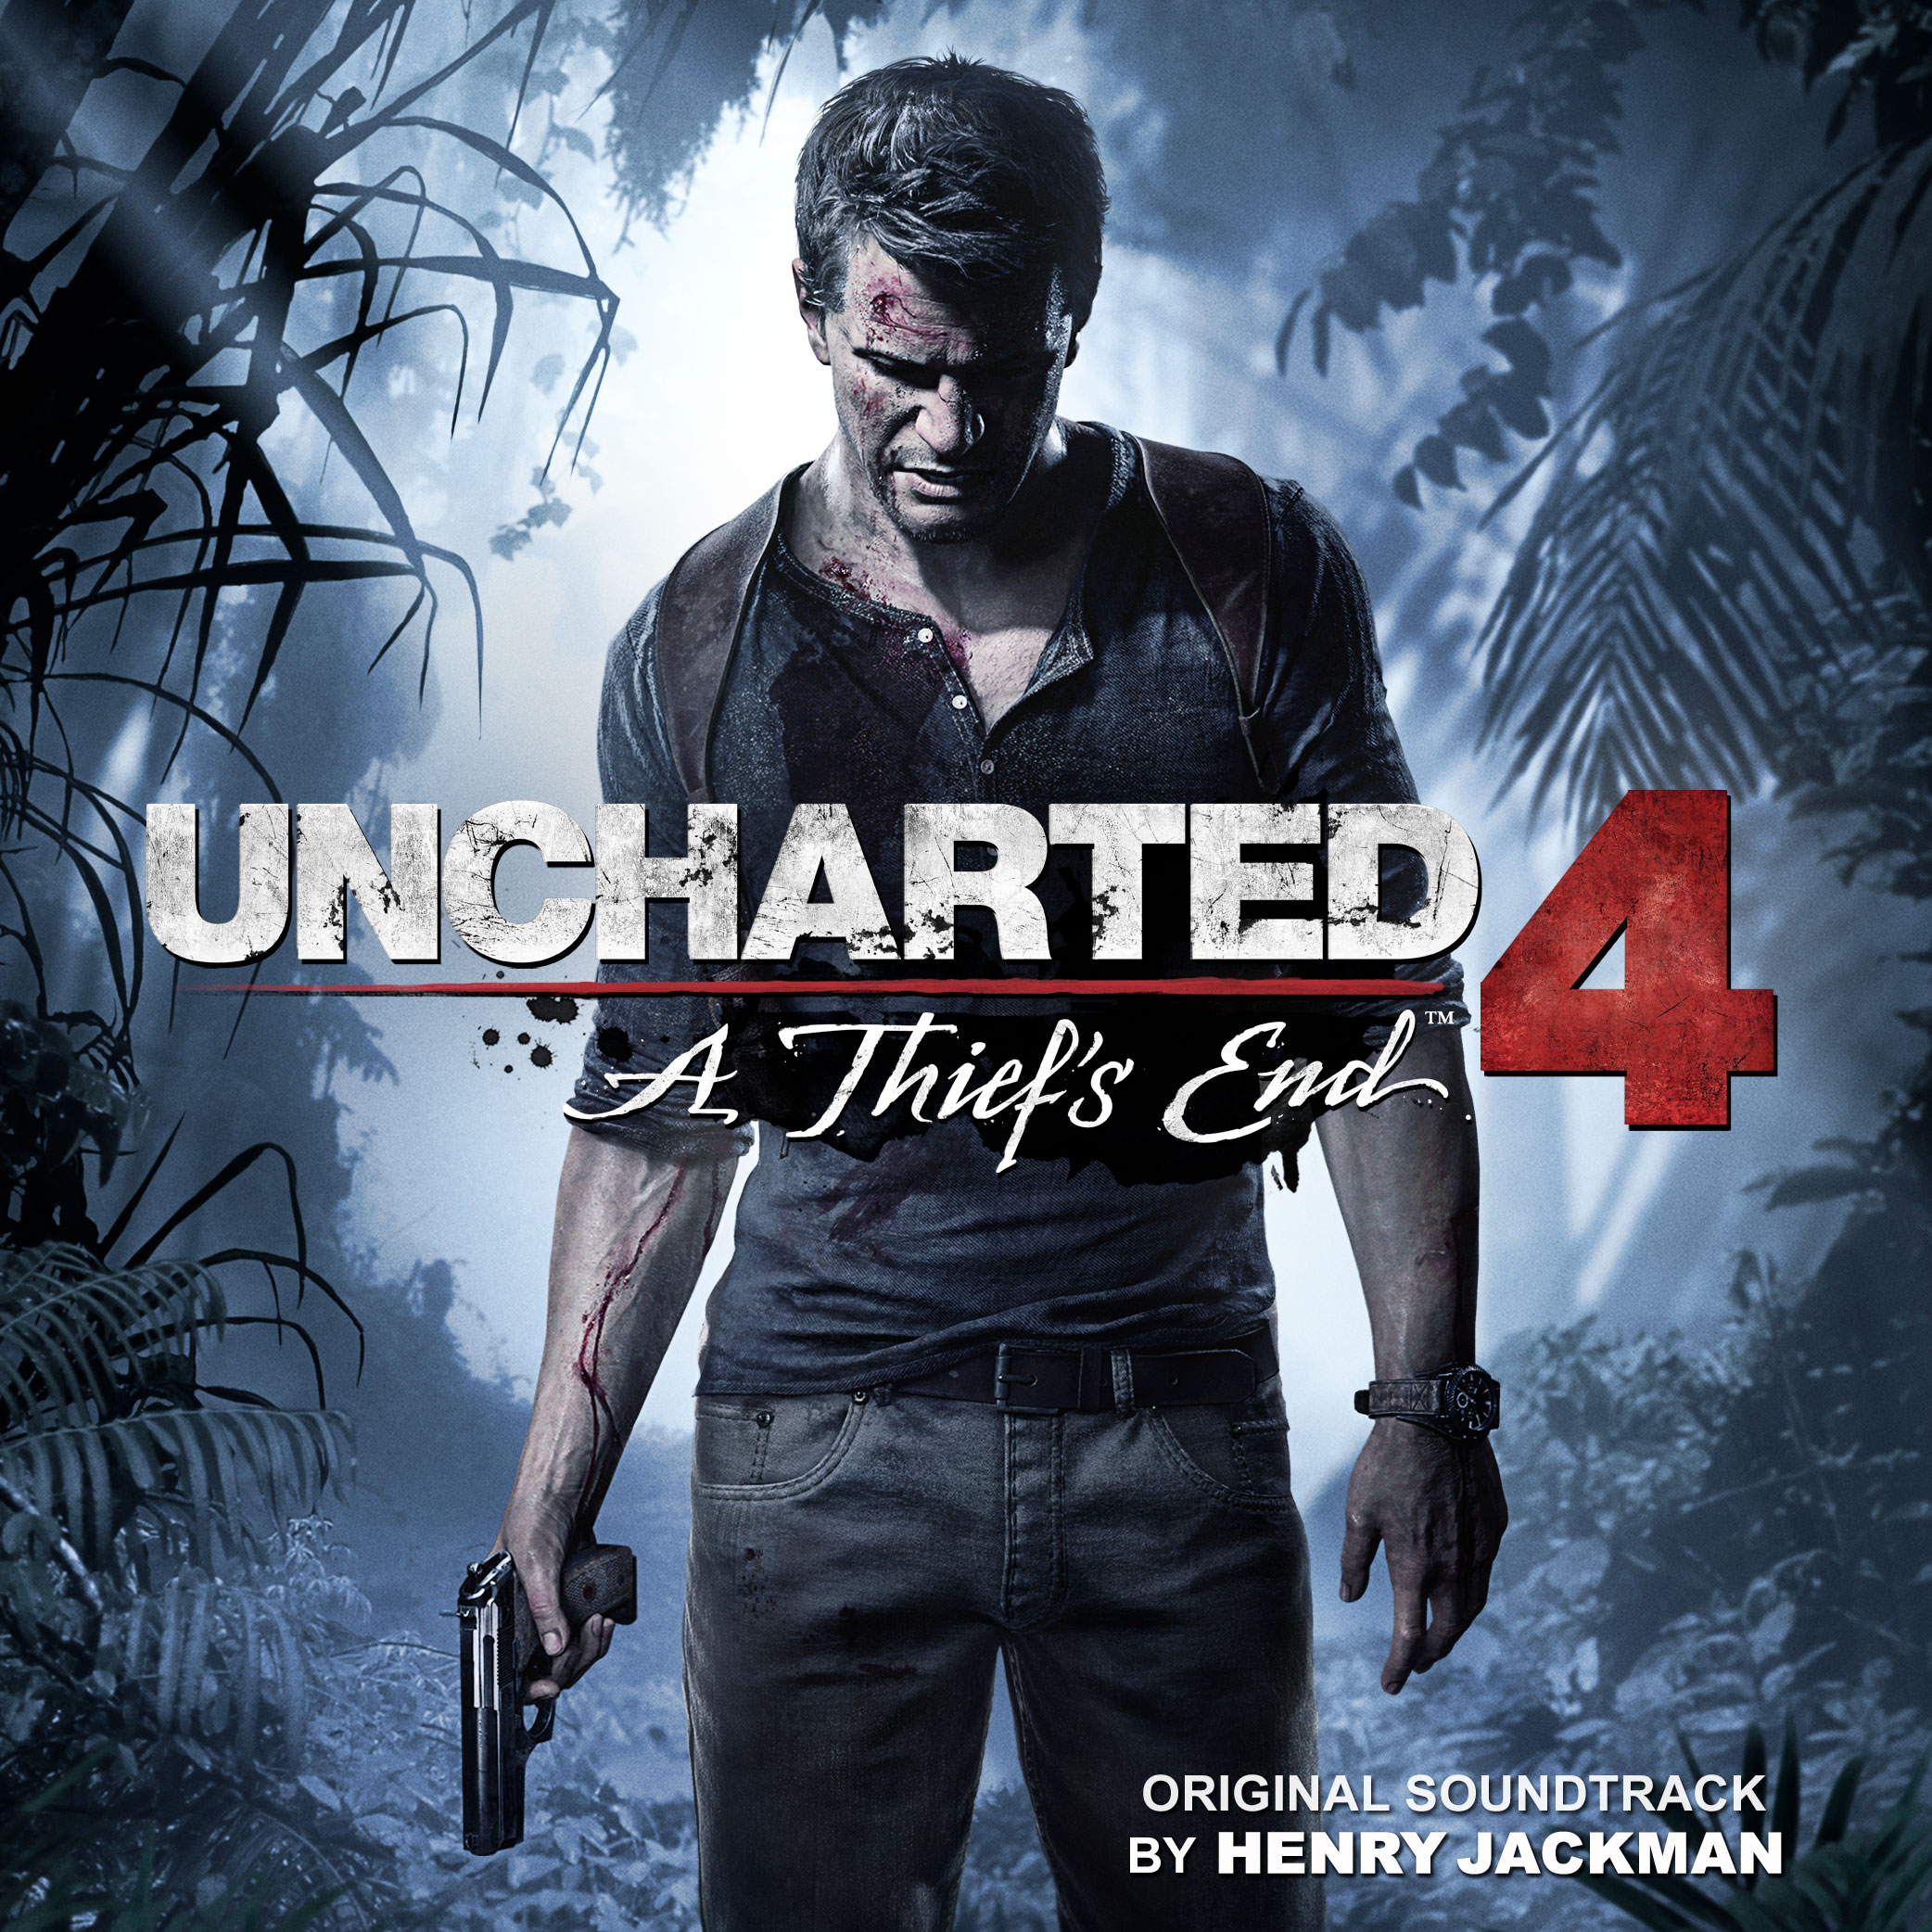 uncharted 4 for pc free download